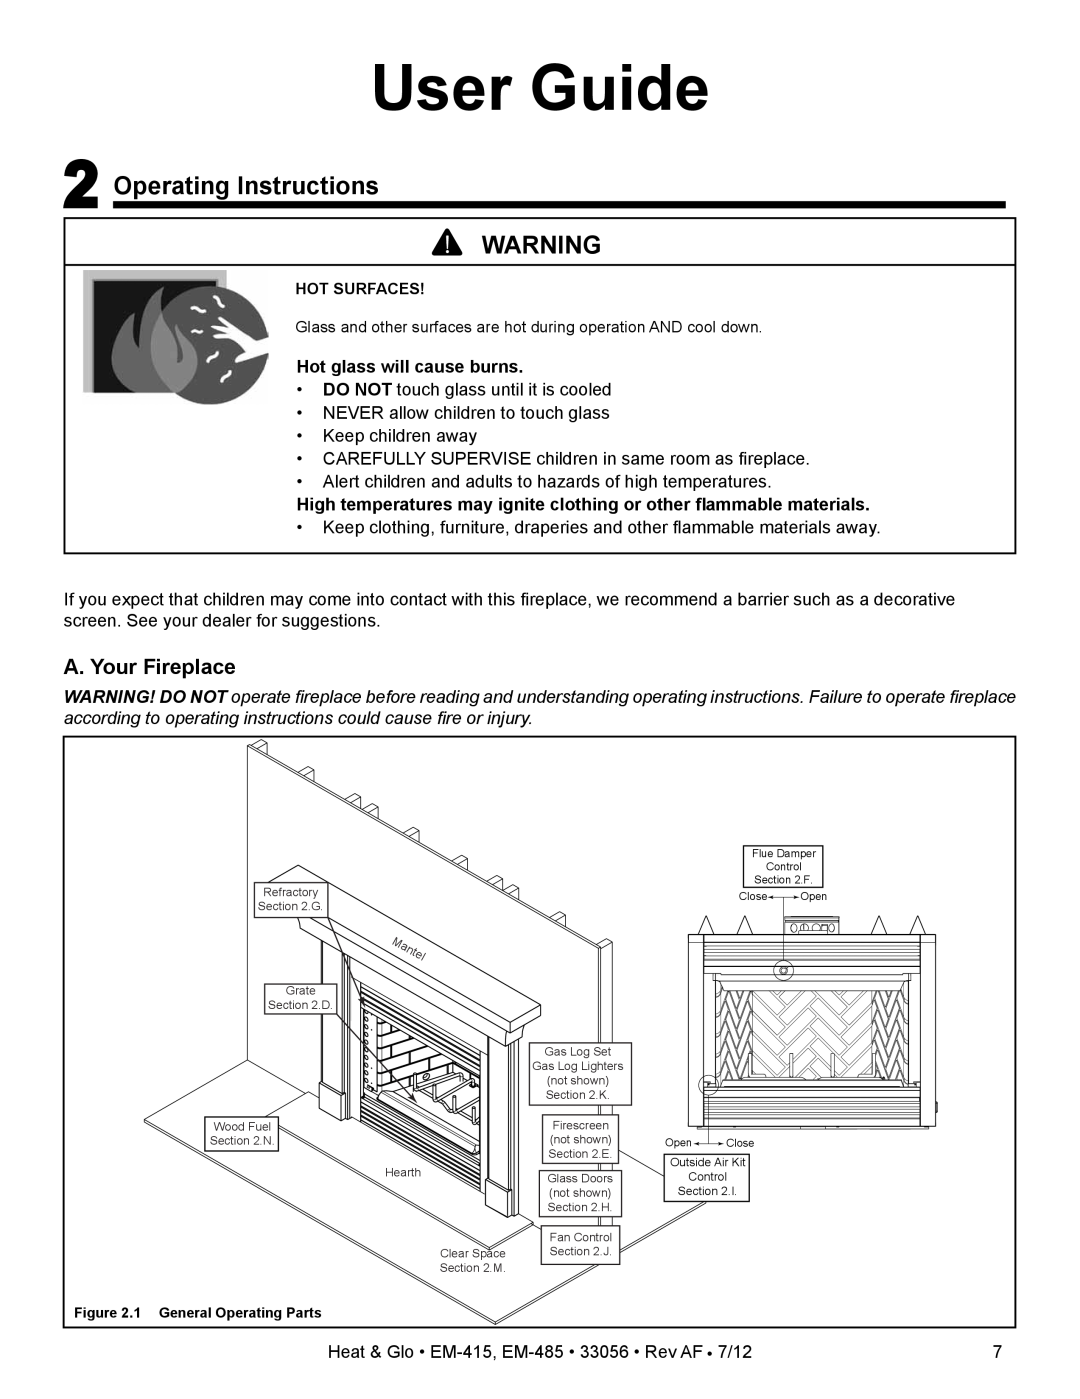 Heat & Glo LifeStyle EM-485T - 42 User Guide, 2Operating Instructions, A. Your Fireplace, Hot glass will cause burns 